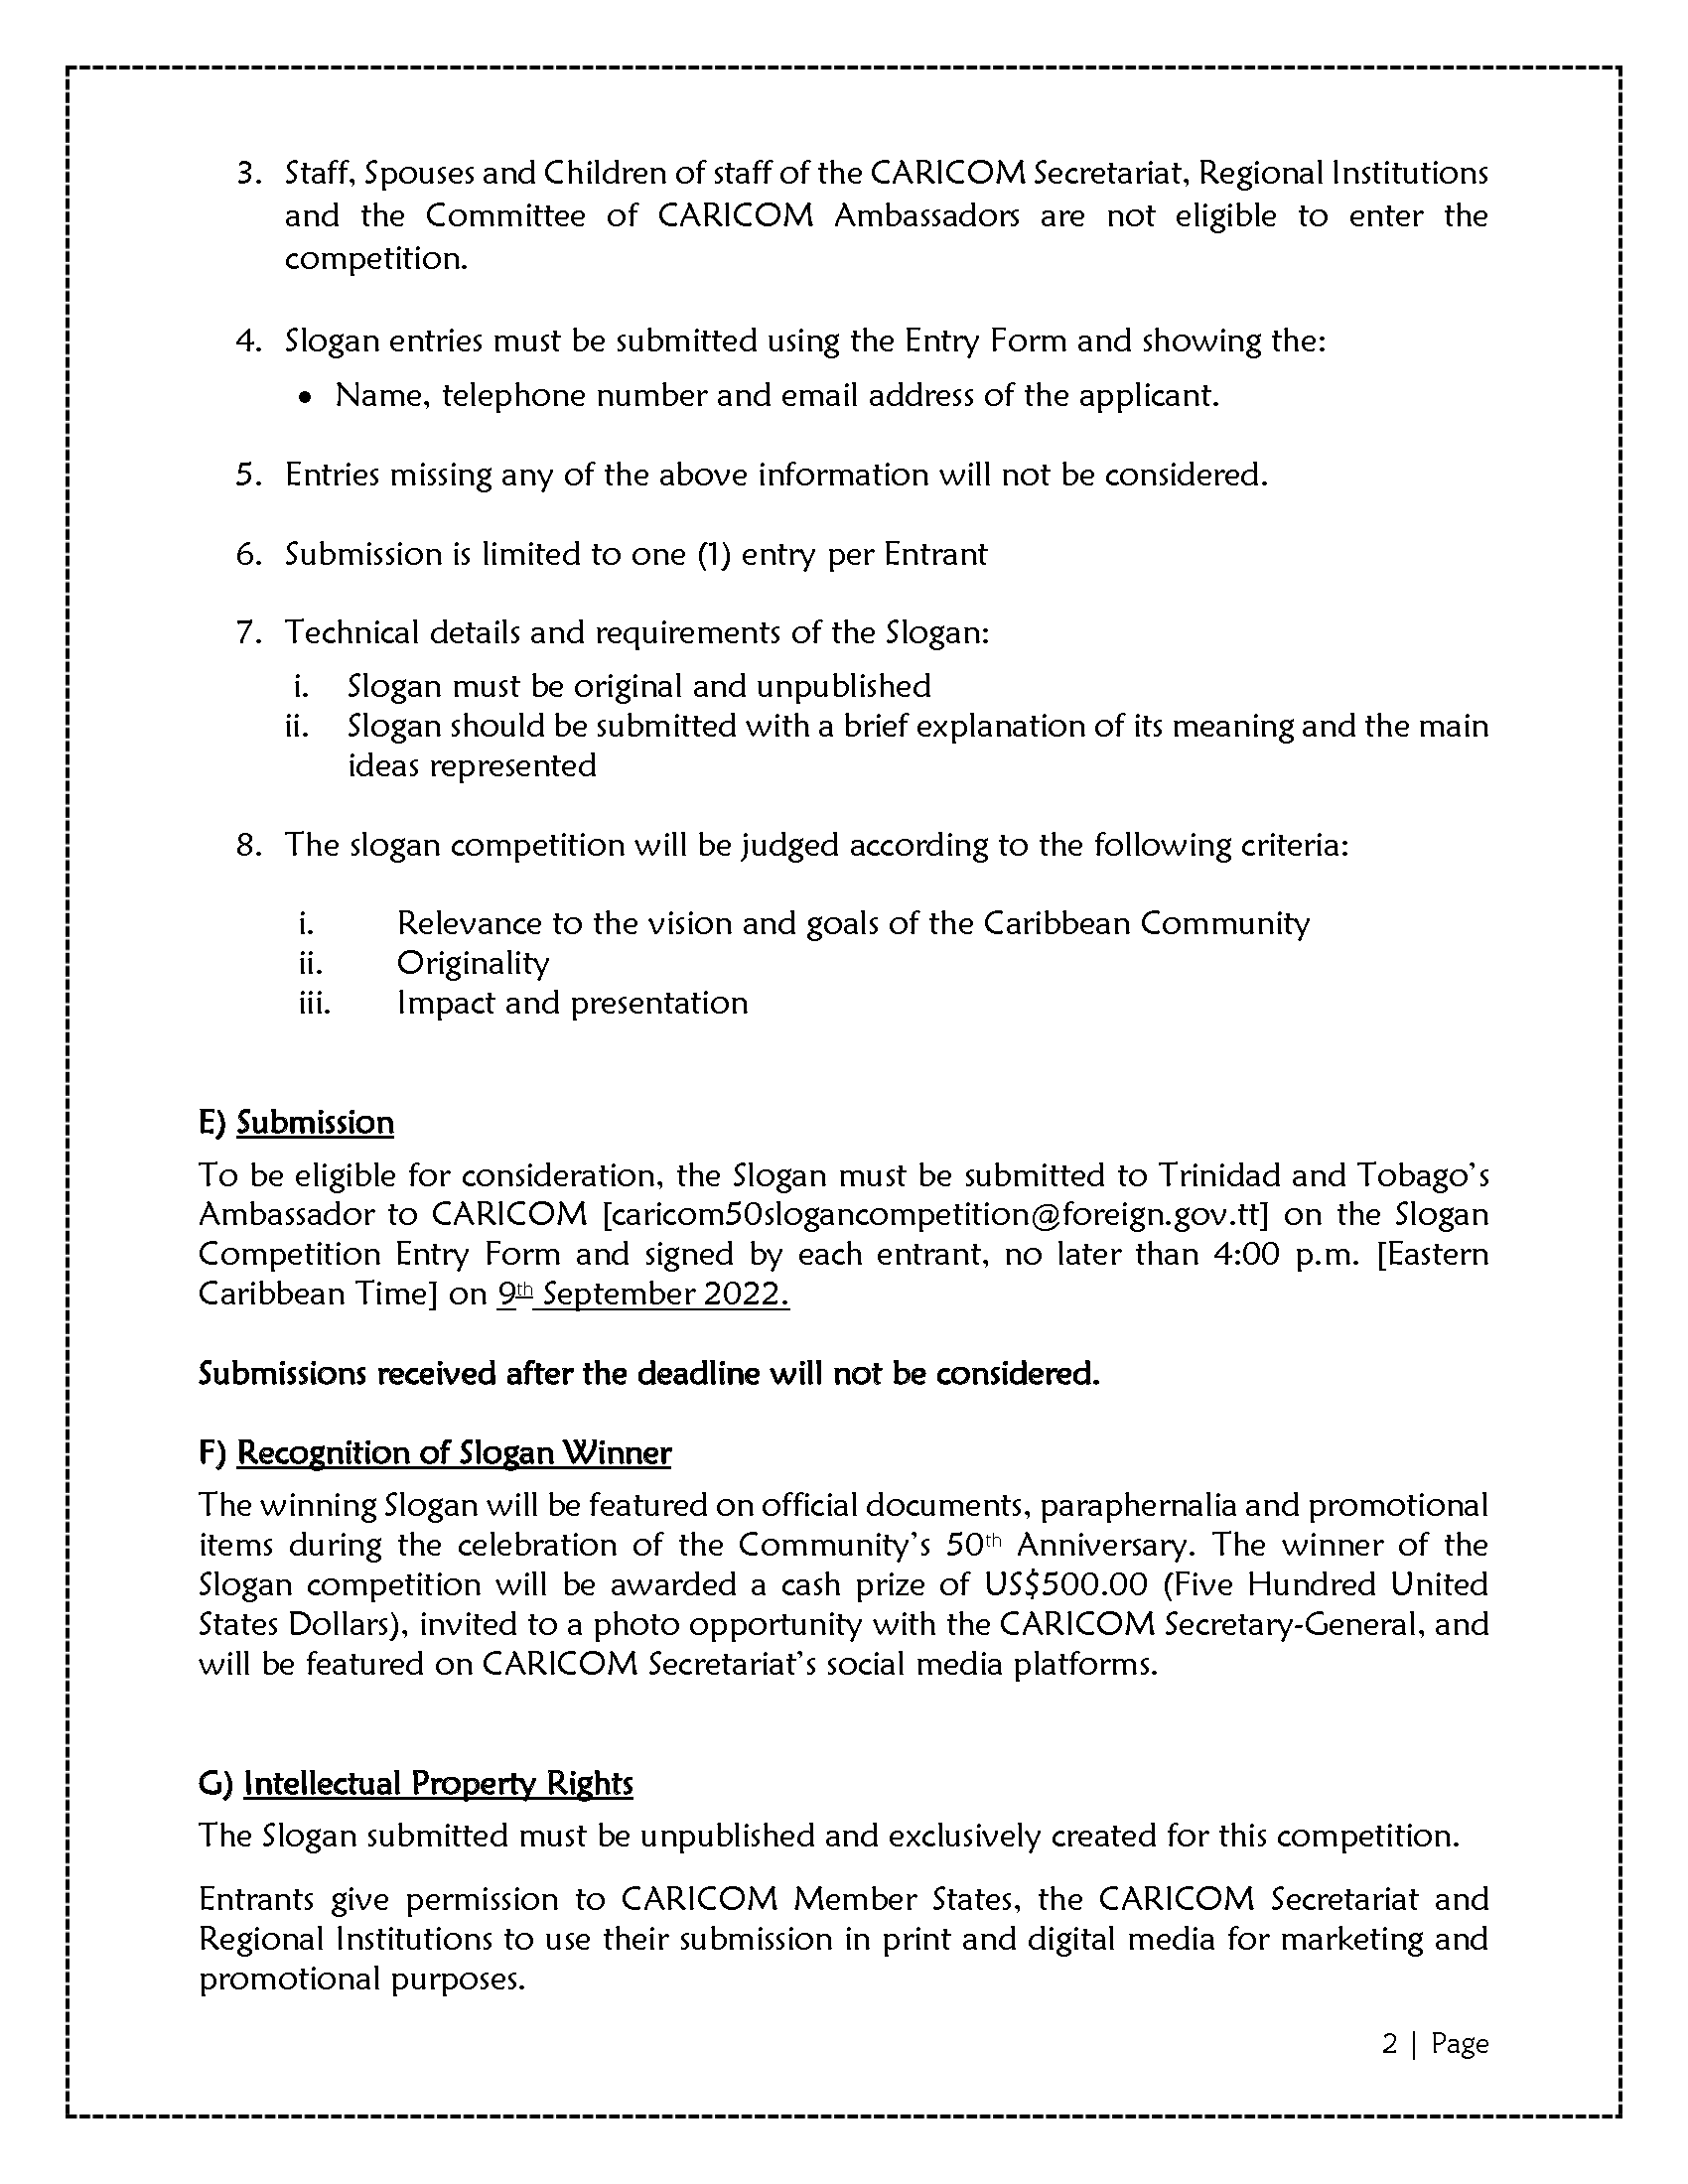 TT CARISEC CARICOM 50 Anniversary Slogan Competition General Guidelines 9 Aug 2022_Page_2